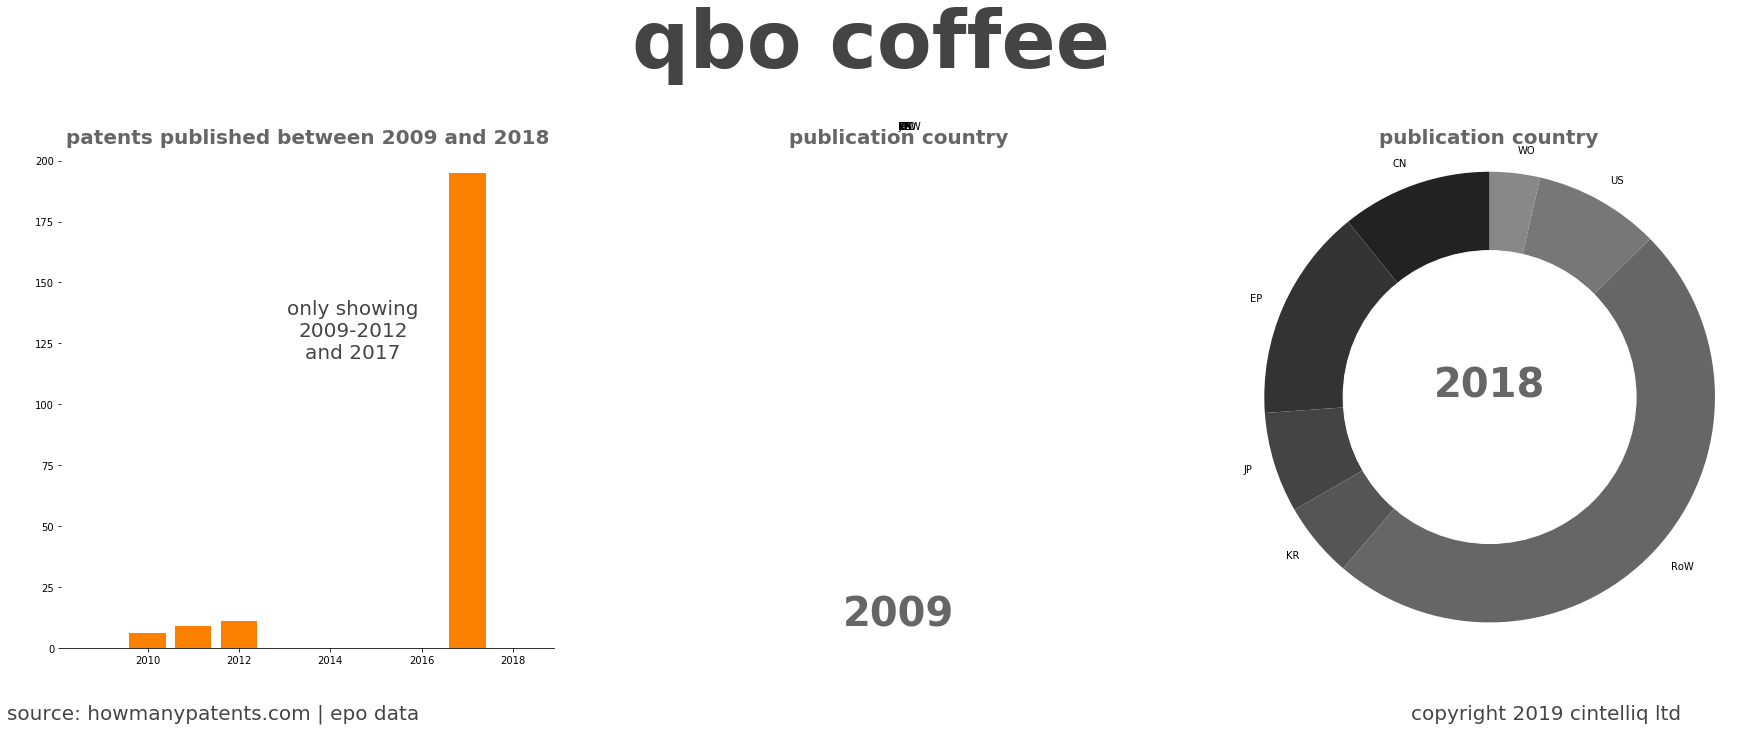 summary of patents for Qbo Coffee